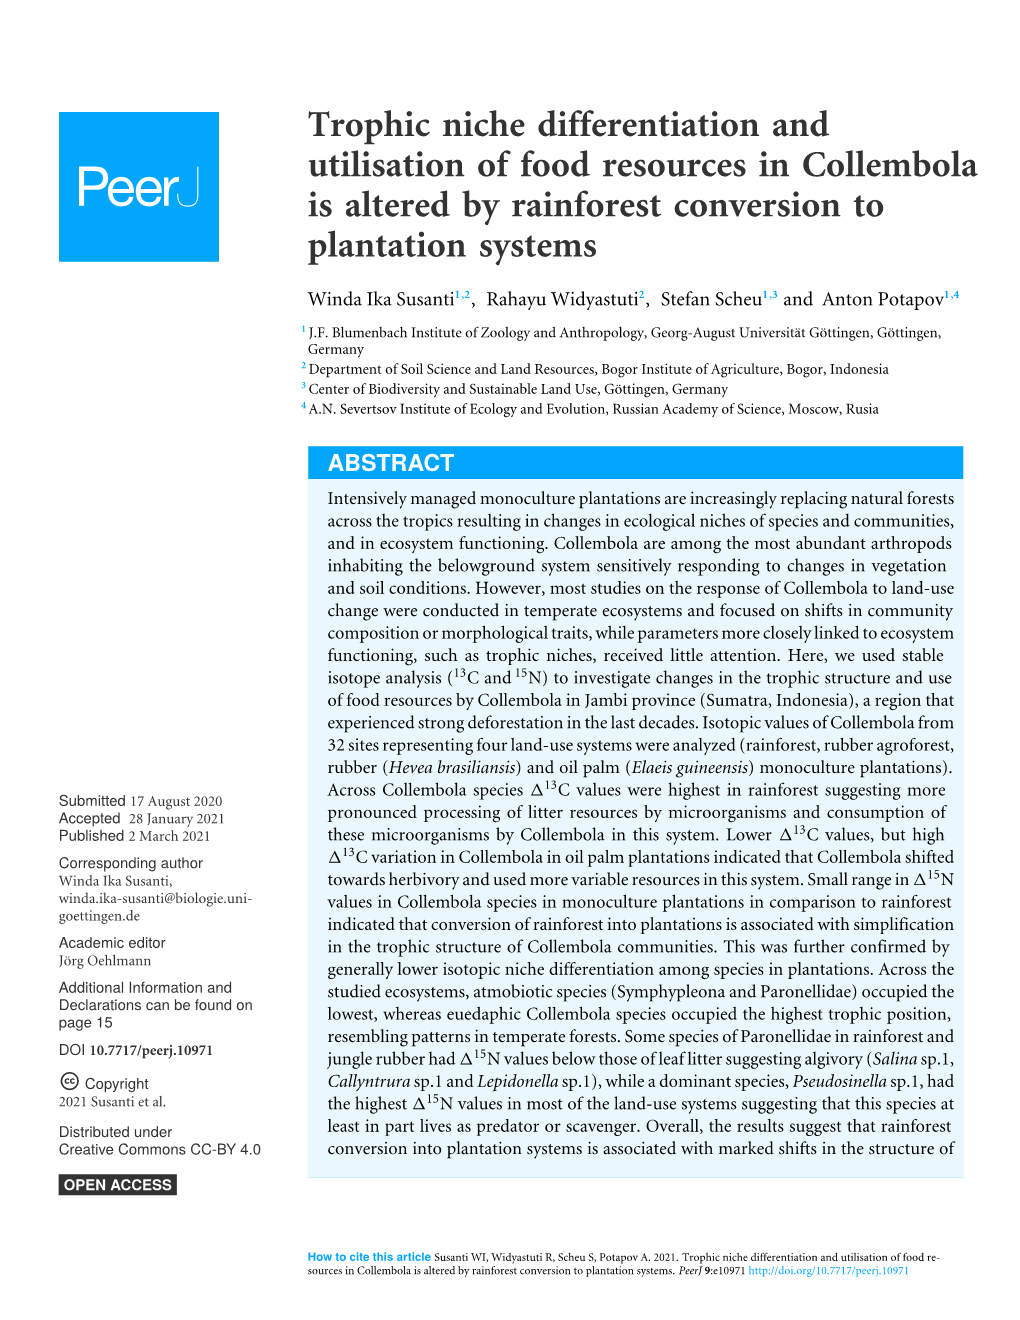 Trophic Niche Differentiation and Utilisation of Food Resources in Collembola Is Altered by Rainforest Conversion to Plantation Systems